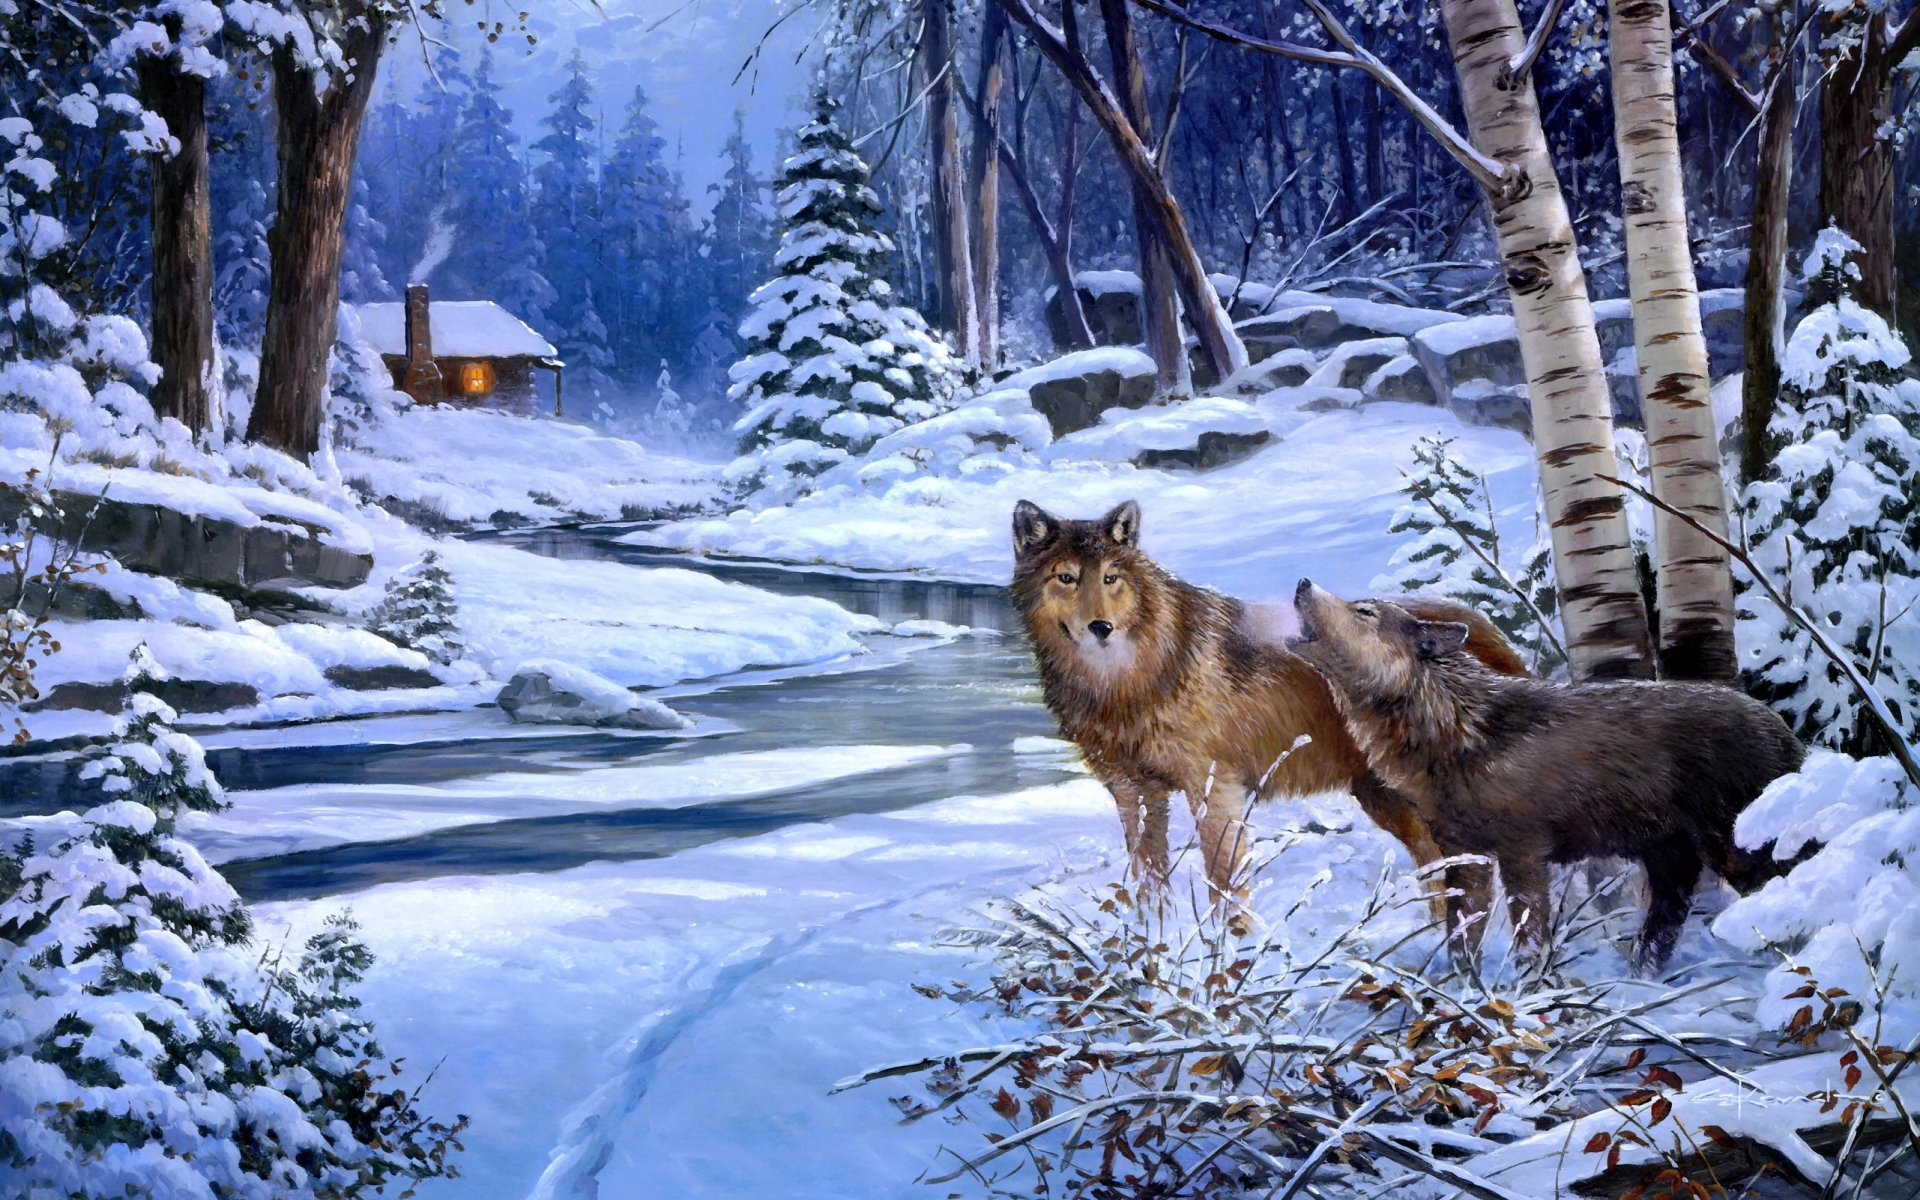 wolves, Wolf, Art, Paintings, Landscapes, Winter, Snow, Rivers, Cabin, Houses, Rustic, Trees, Forest, Woods Wallpaper